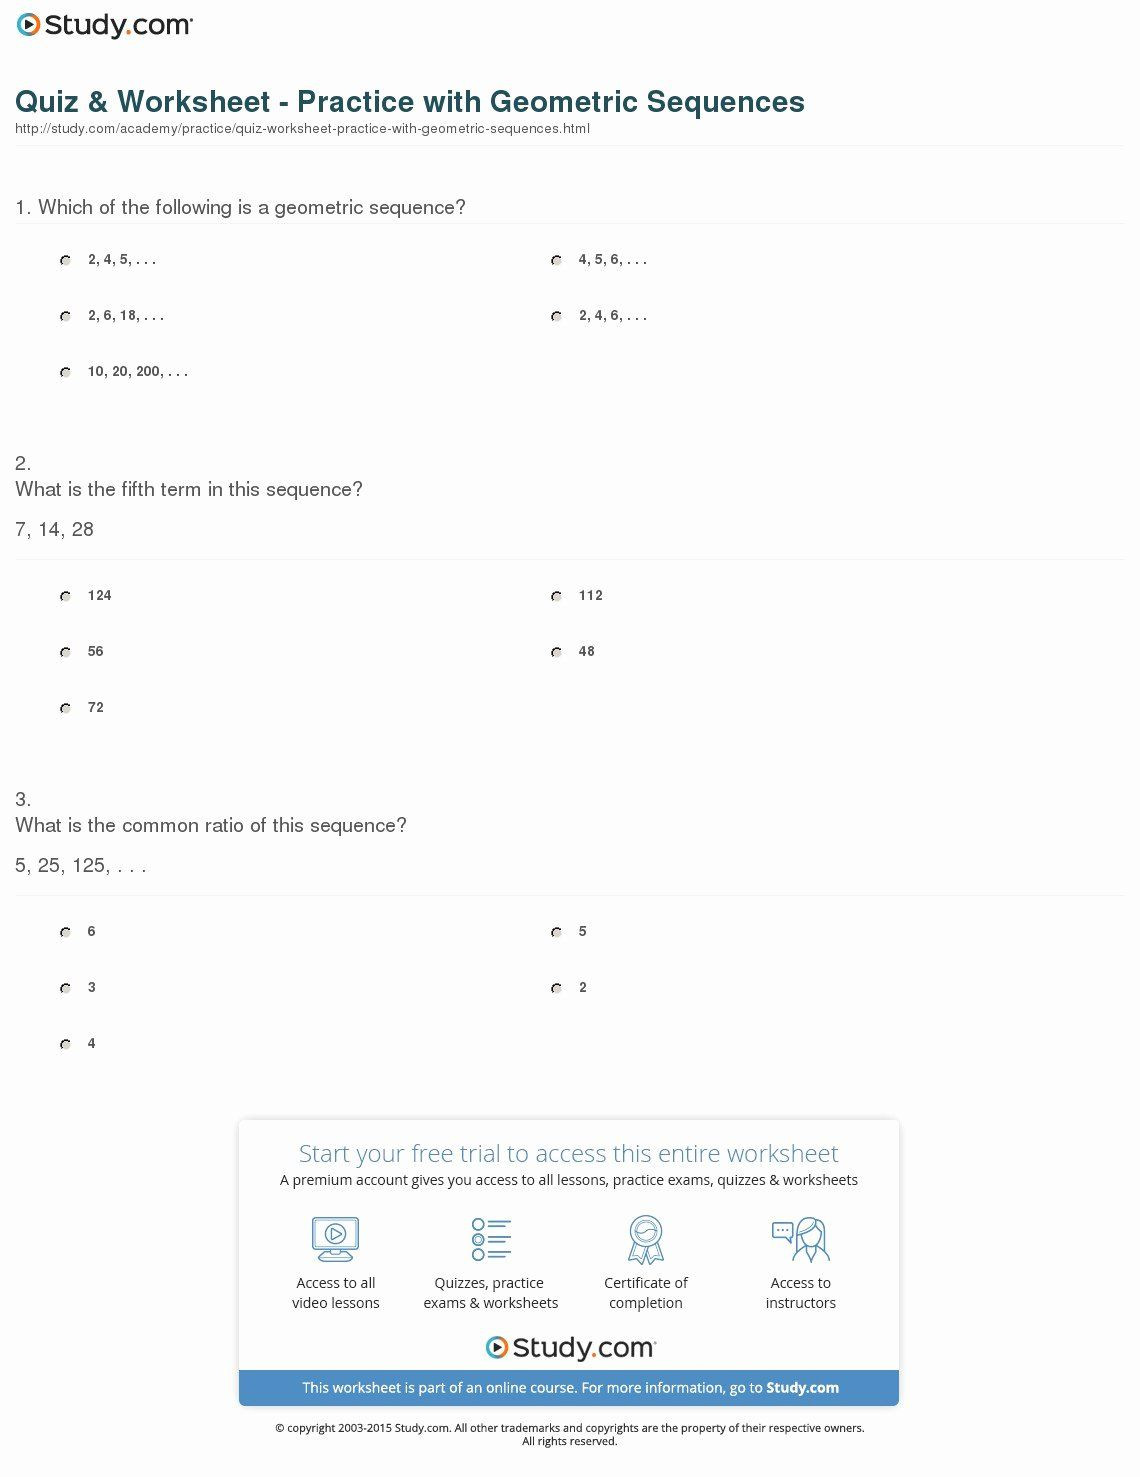 Geometric Sequences Worksheet Answers 50 Geometric Sequences Worksheet Answers In 2020